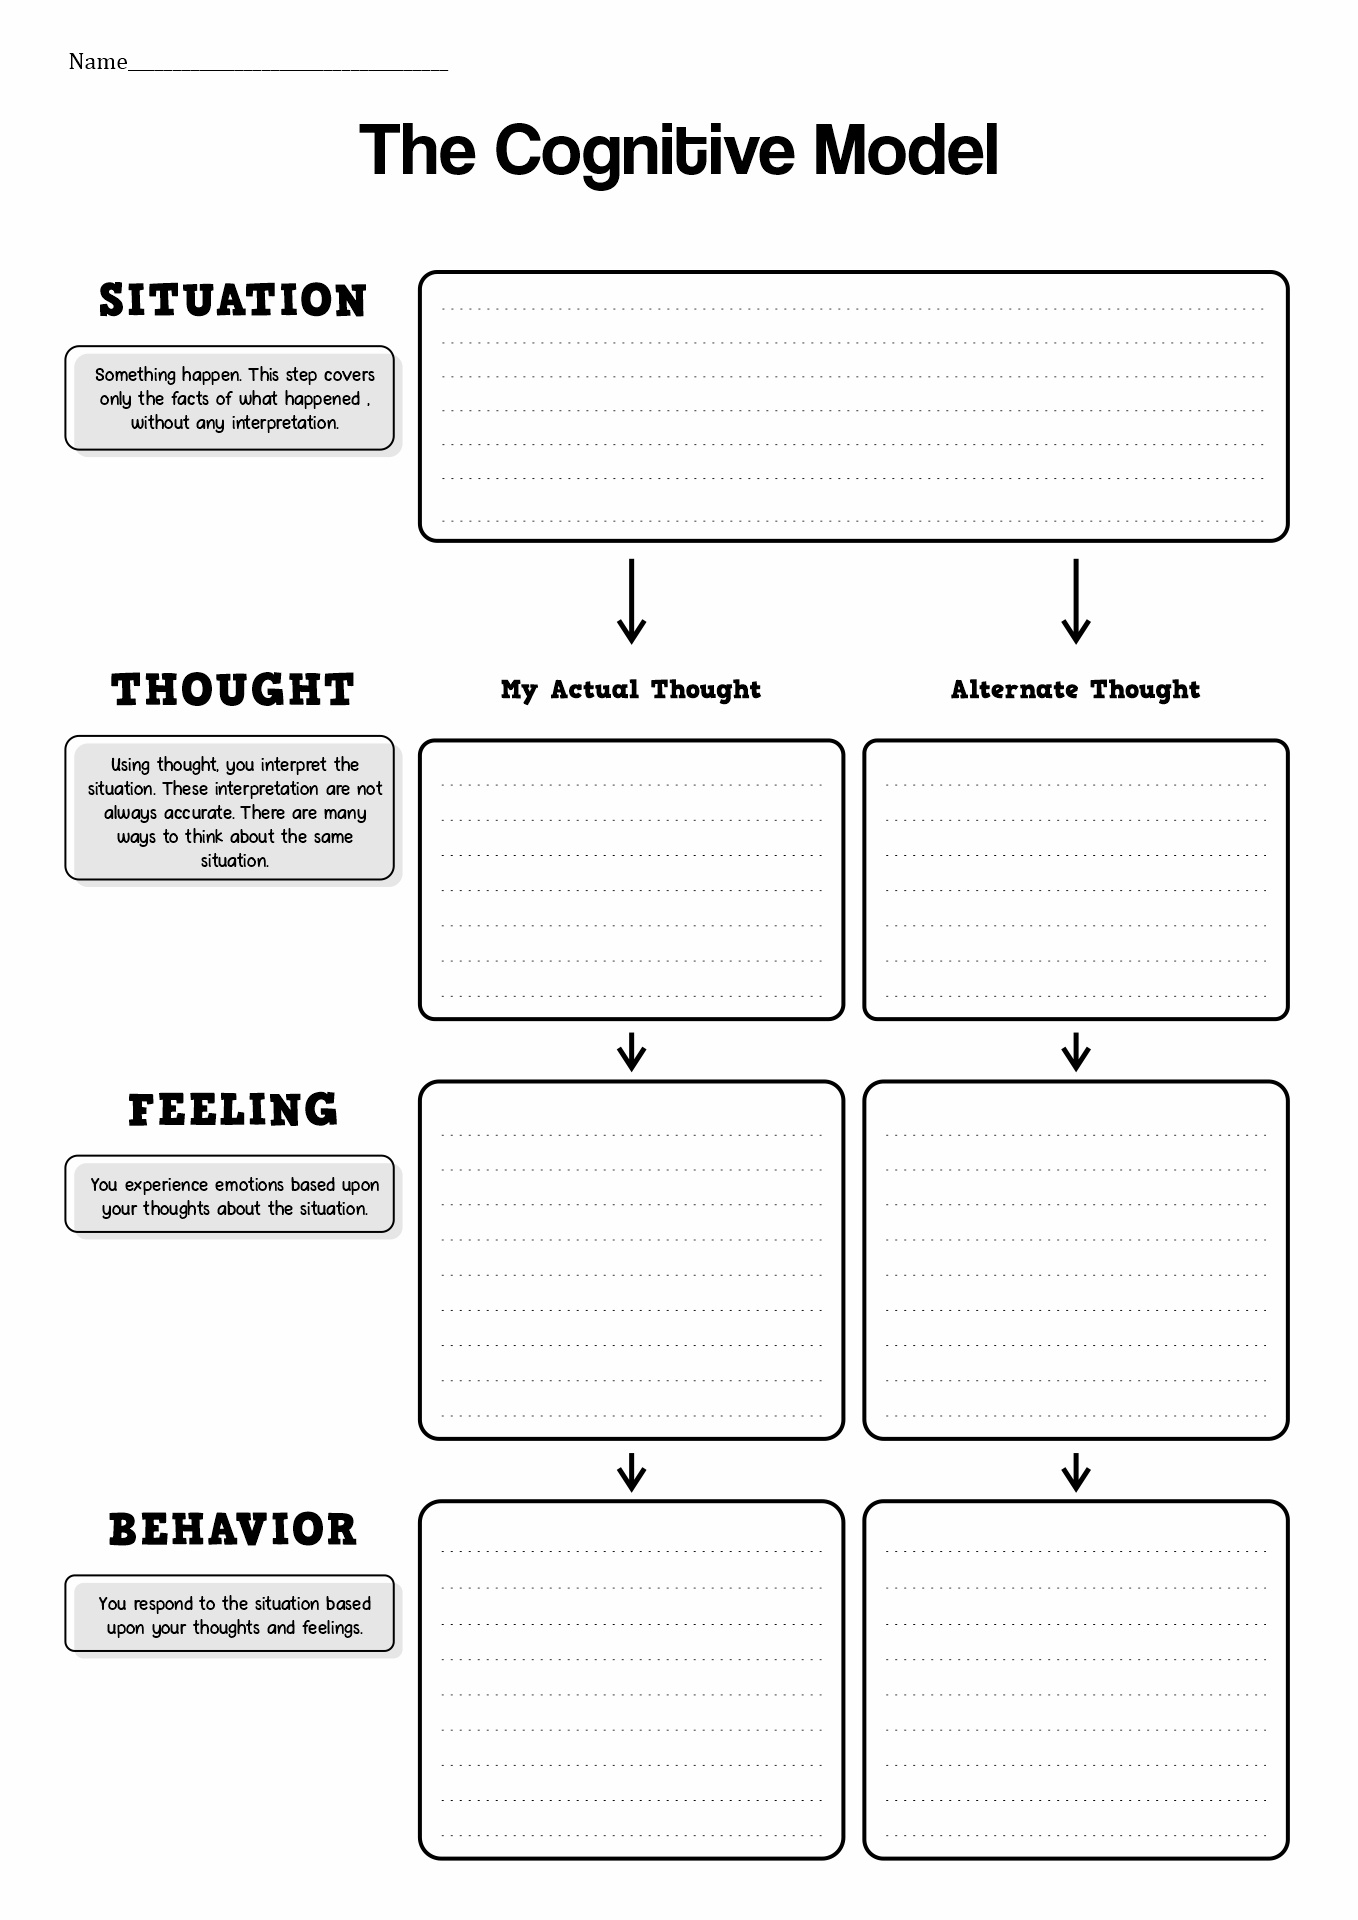 18-best-images-of-cognitive-behavioral-therapy-worksheets-anxiety